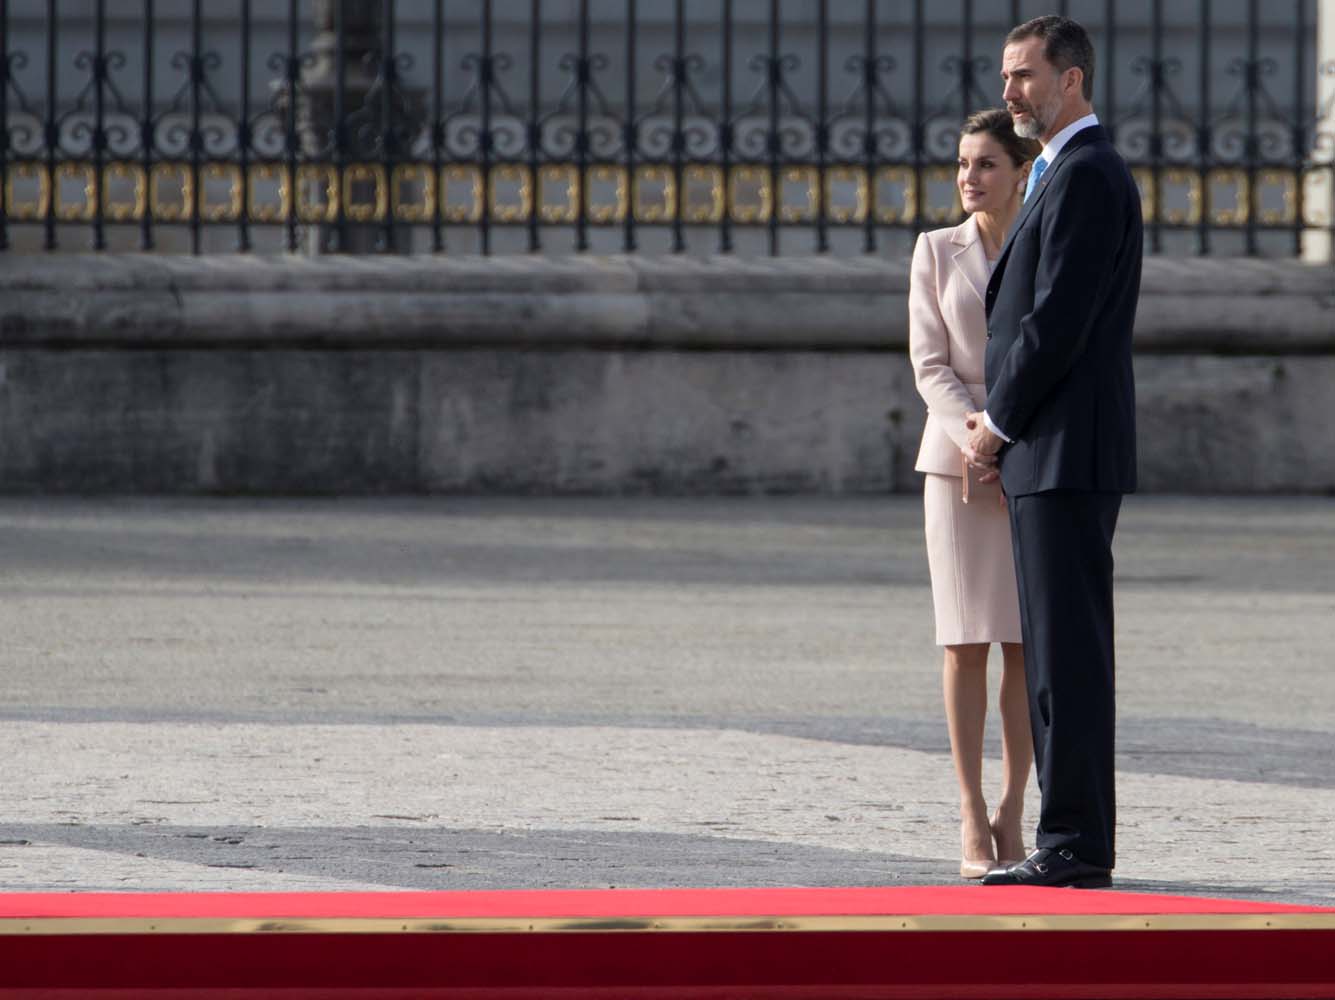 Spain's King Felipe (R) and Queen Letizia stand as they wait for the arrival of Argentina's President Mauricio Macri and first lady Juliana Awada (unseen) before the welcoming ceremony at Royal Palace in Madrid, Spain February 22, 2017. REUTERS/Sergio Perez